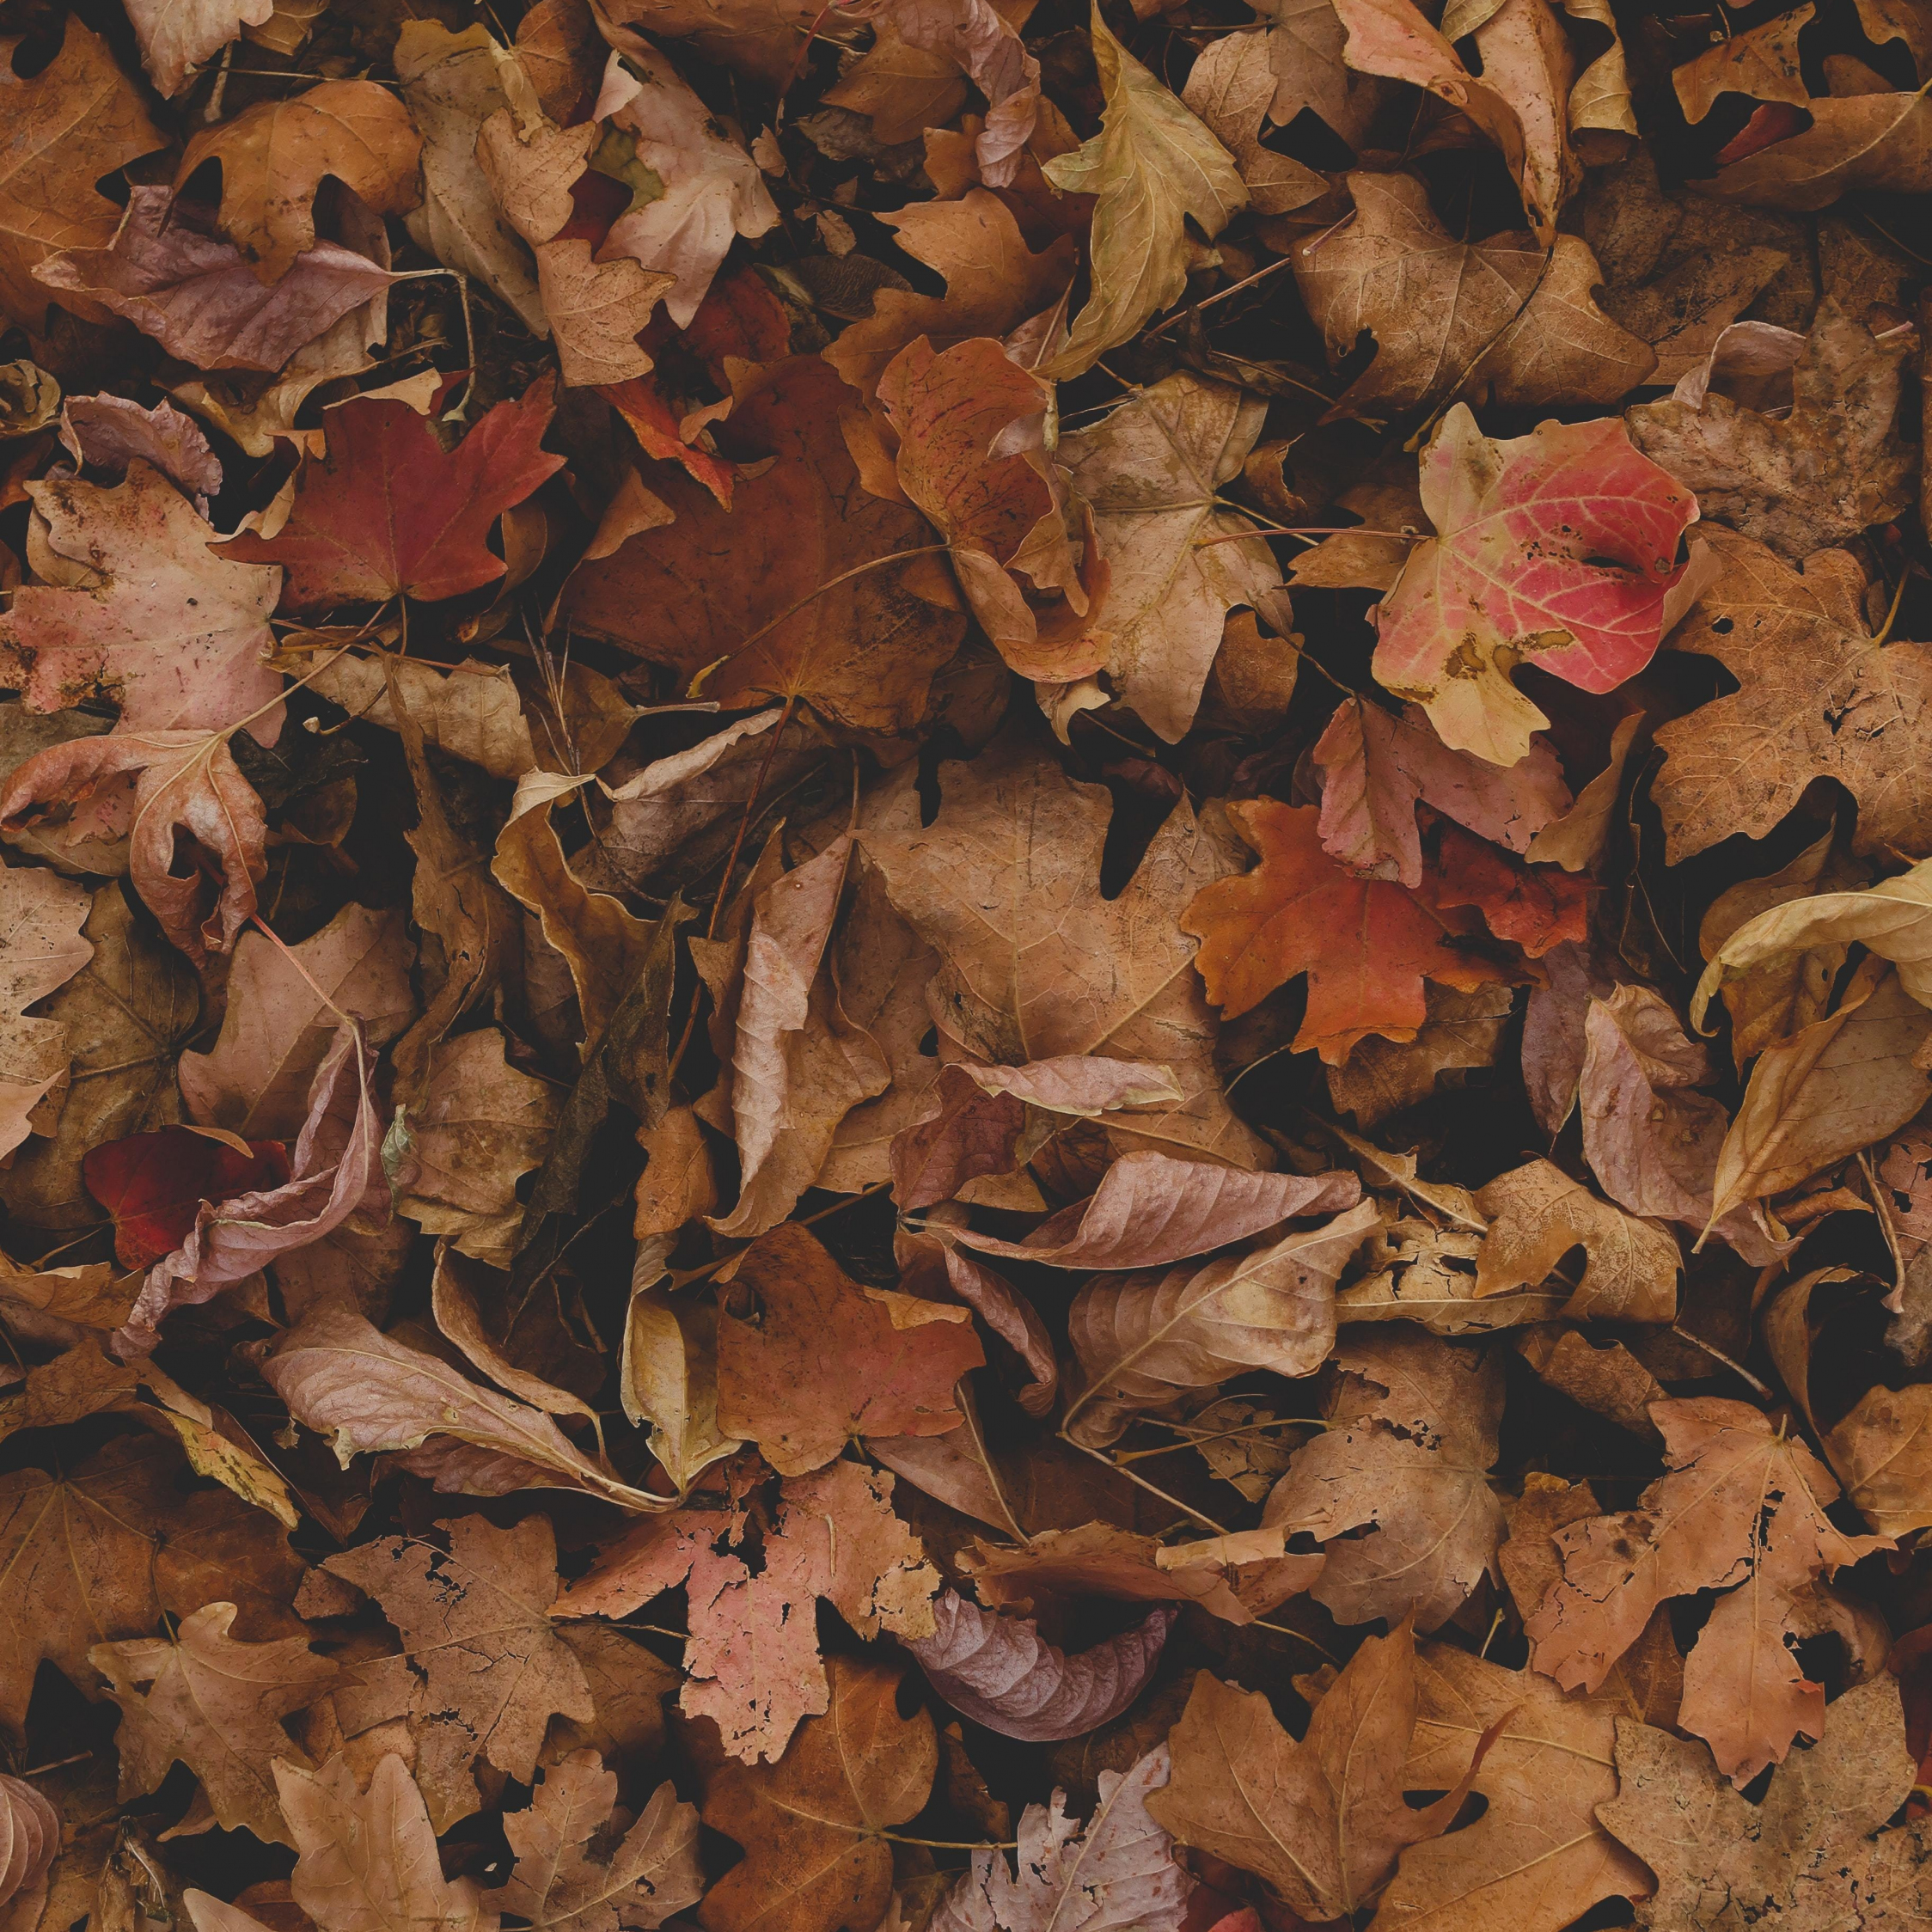 Download wallpaper 2248x2248 dry, fallen leaves, autumn, ipad air, ipad air ipad ipad ipad mini ipad mini 2248x2248 HD background, 26141